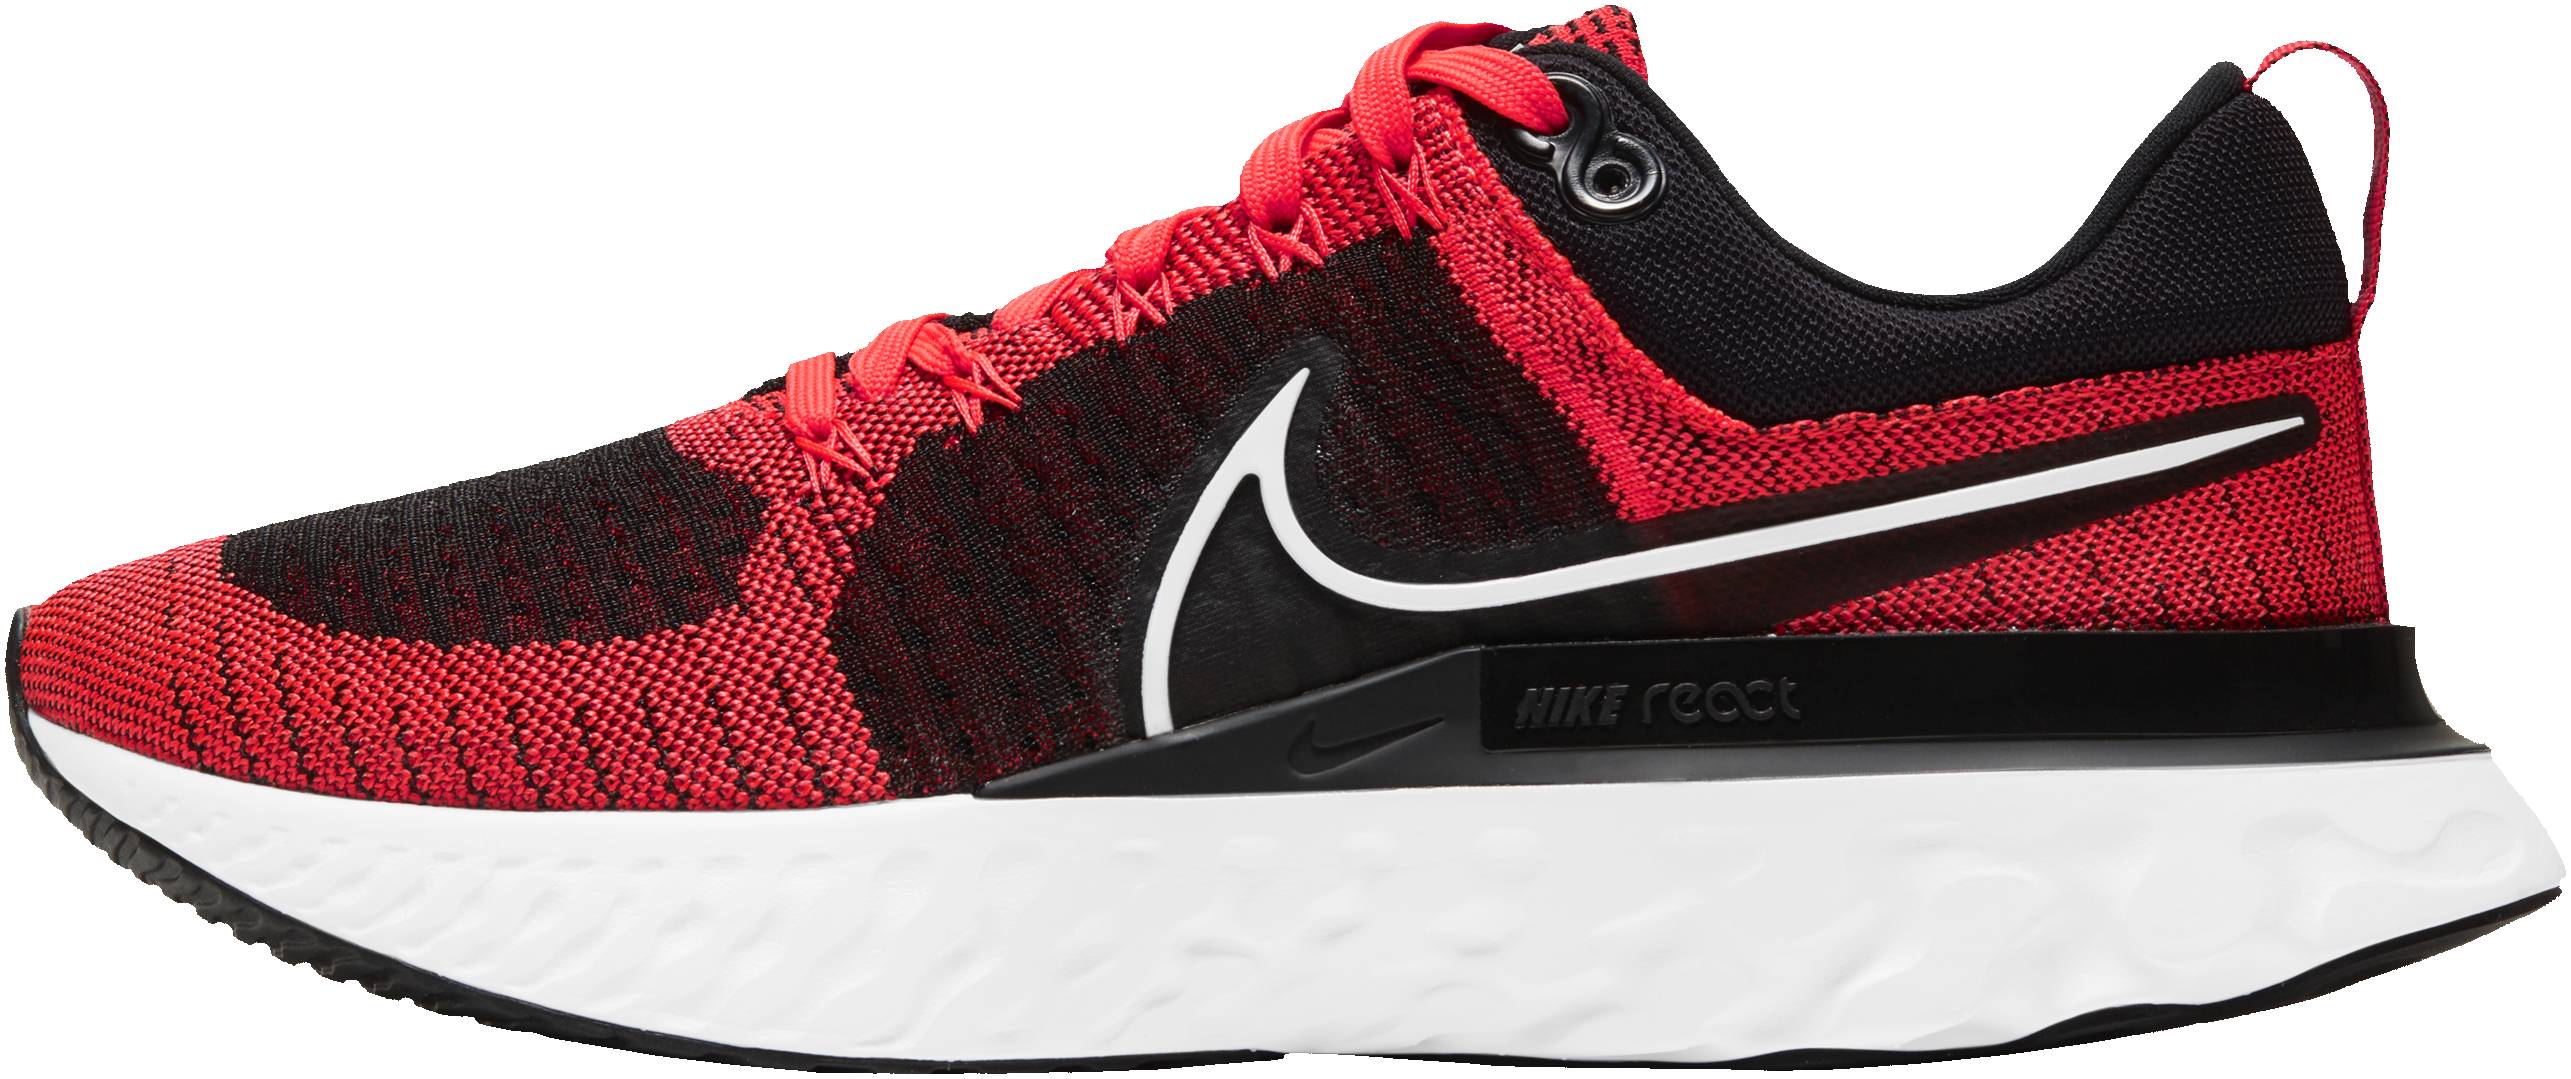 nike flywire review